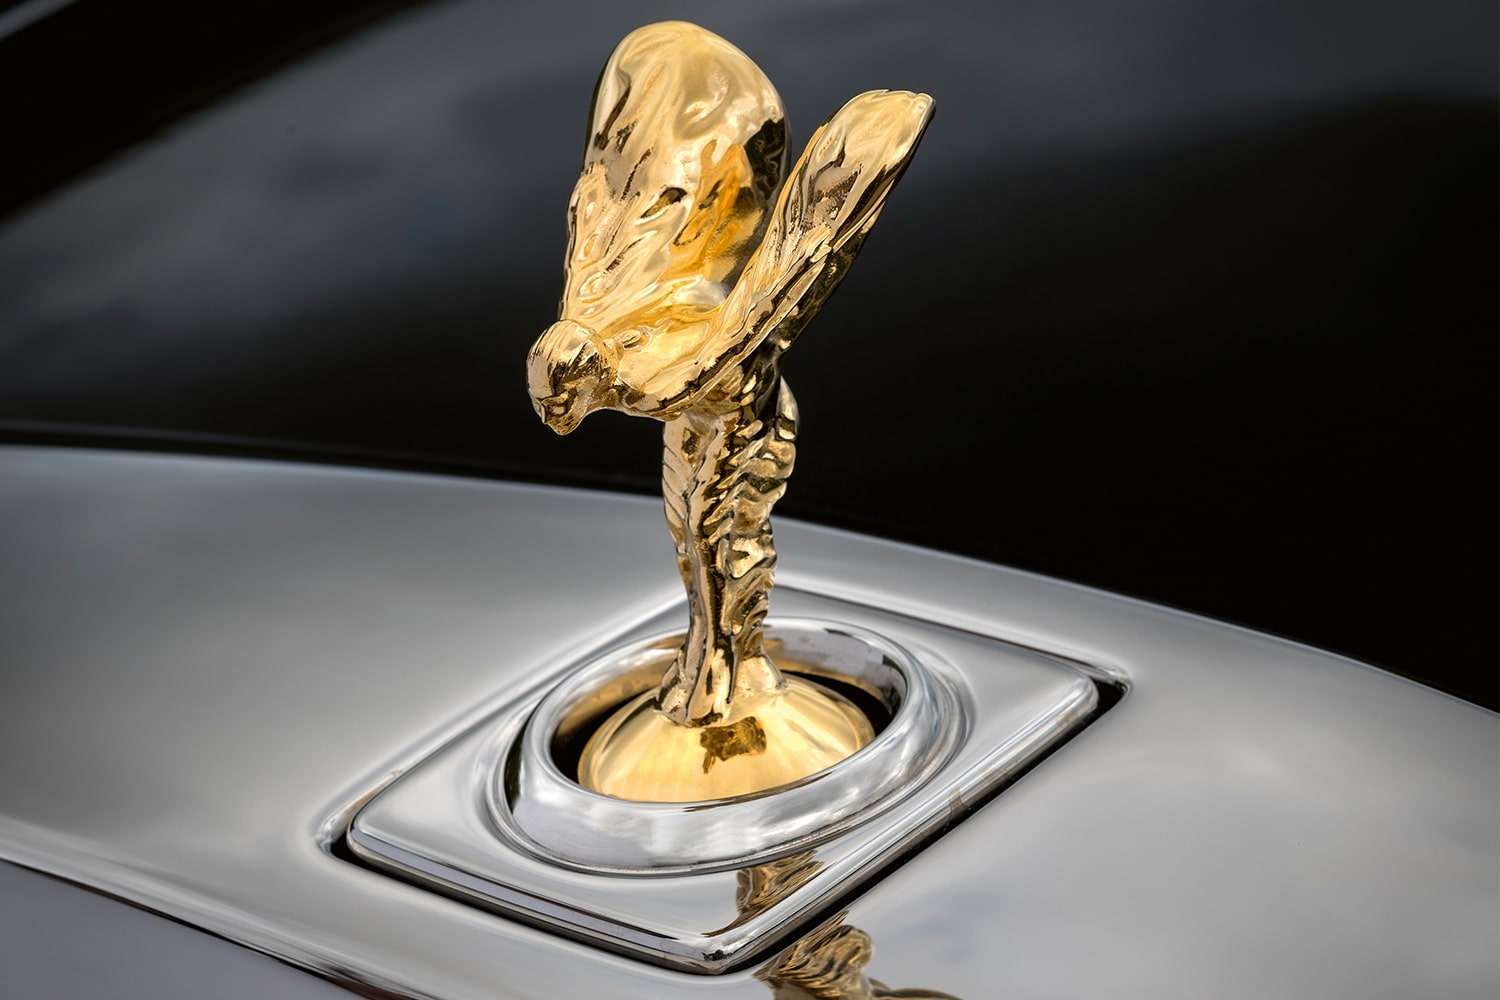 Rolls Royce Share Price Forecast June 2021 – Time to Buy RR?